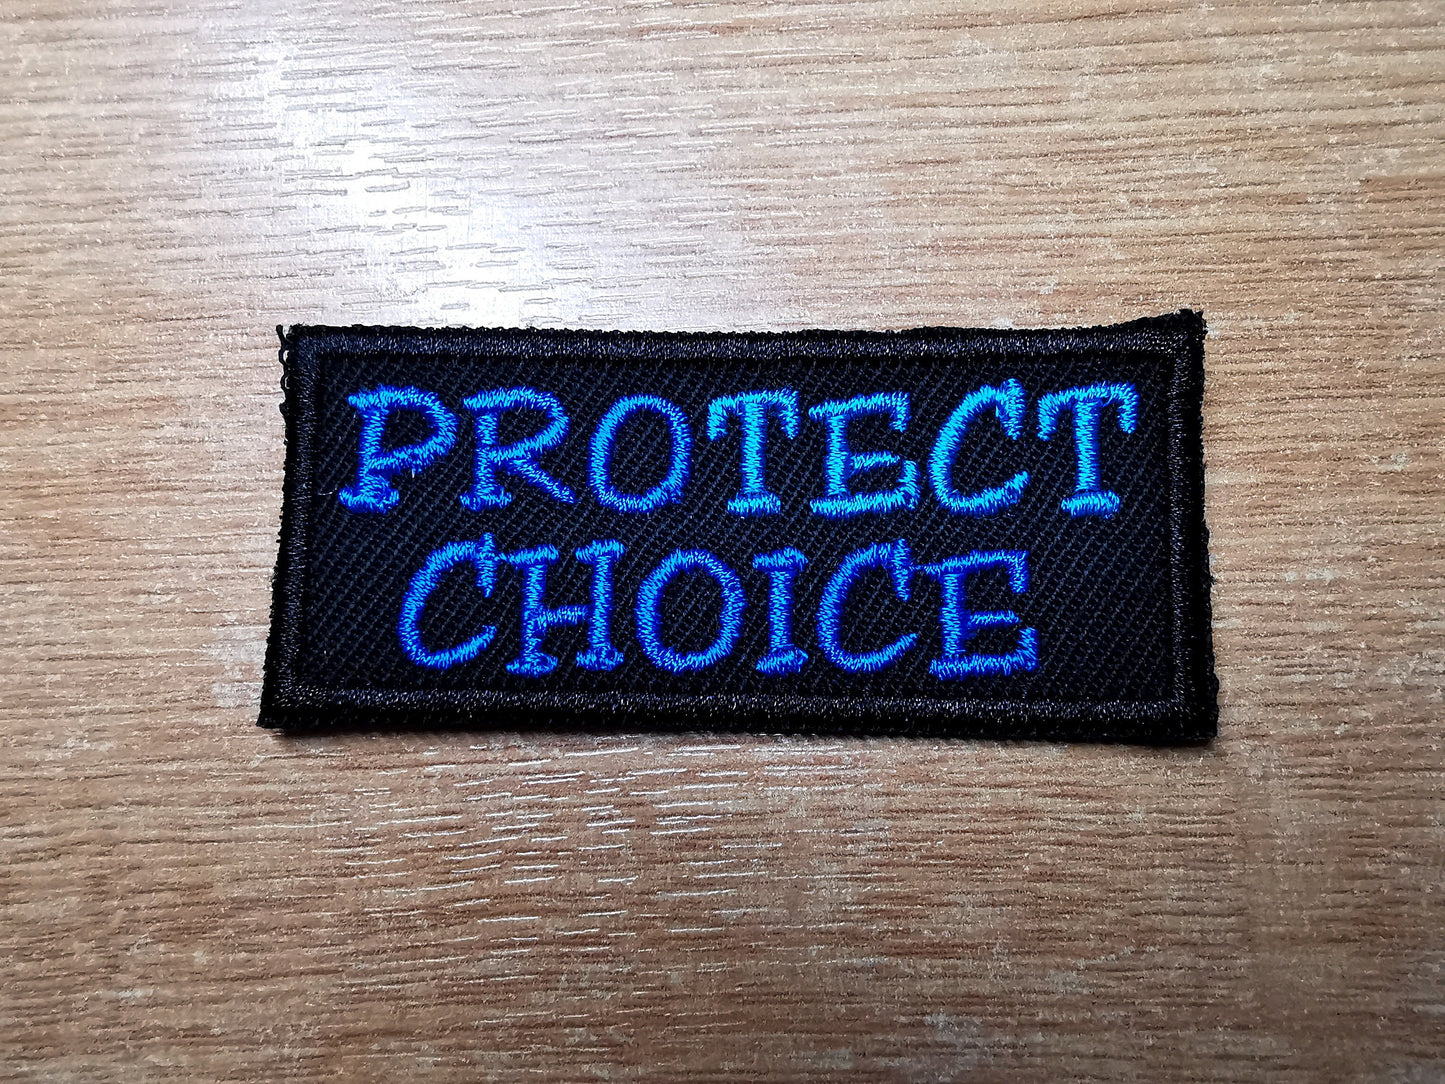 Protect Choice Pro Choice Blue Feminist Embroidered Iron On Patch Collection Abortion Politics Punk